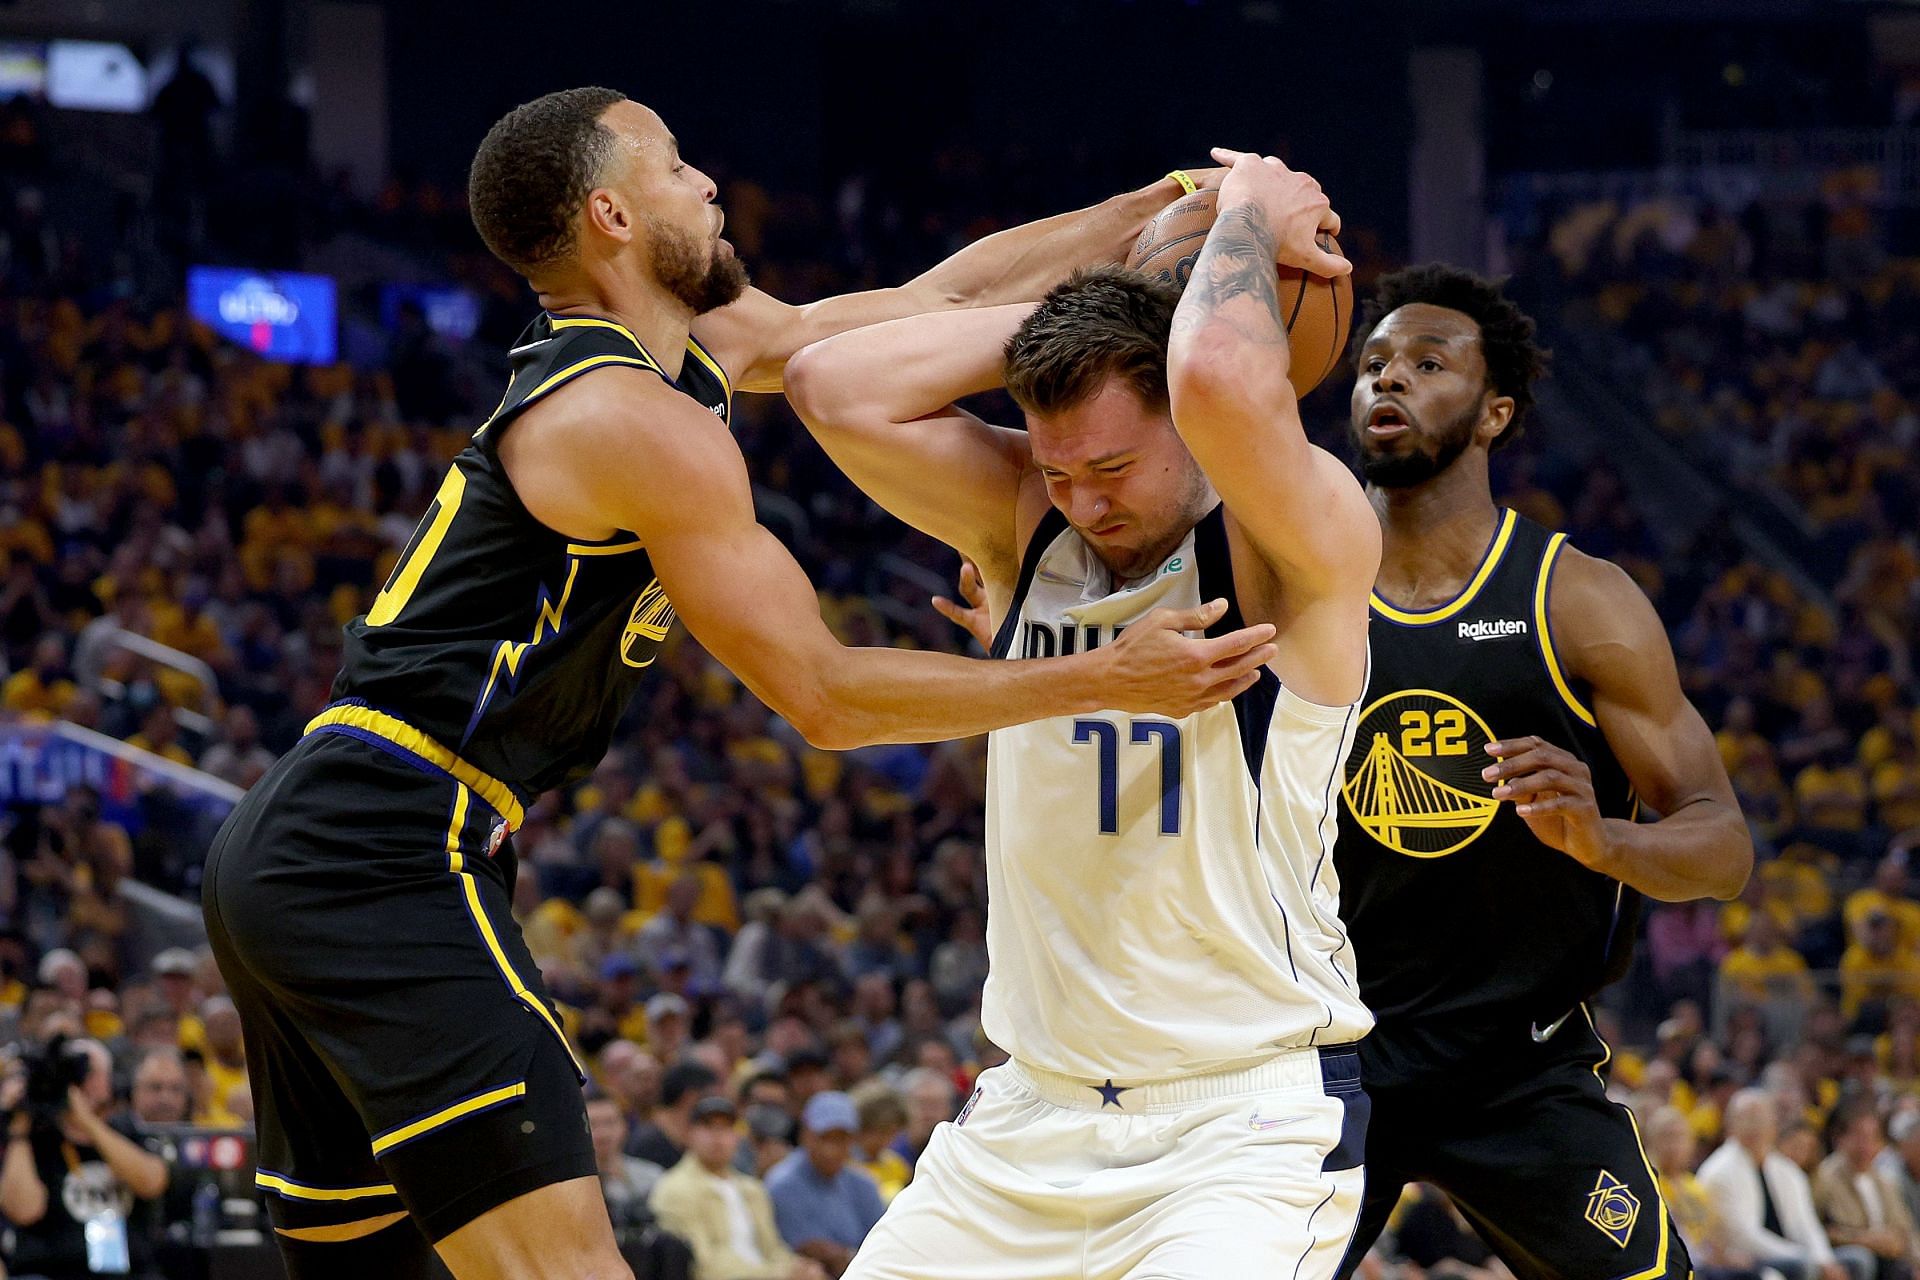 Steph Curry and Andrew Wiggins of the Warriors hounds Luka Doncic of the Mavericks during their game.